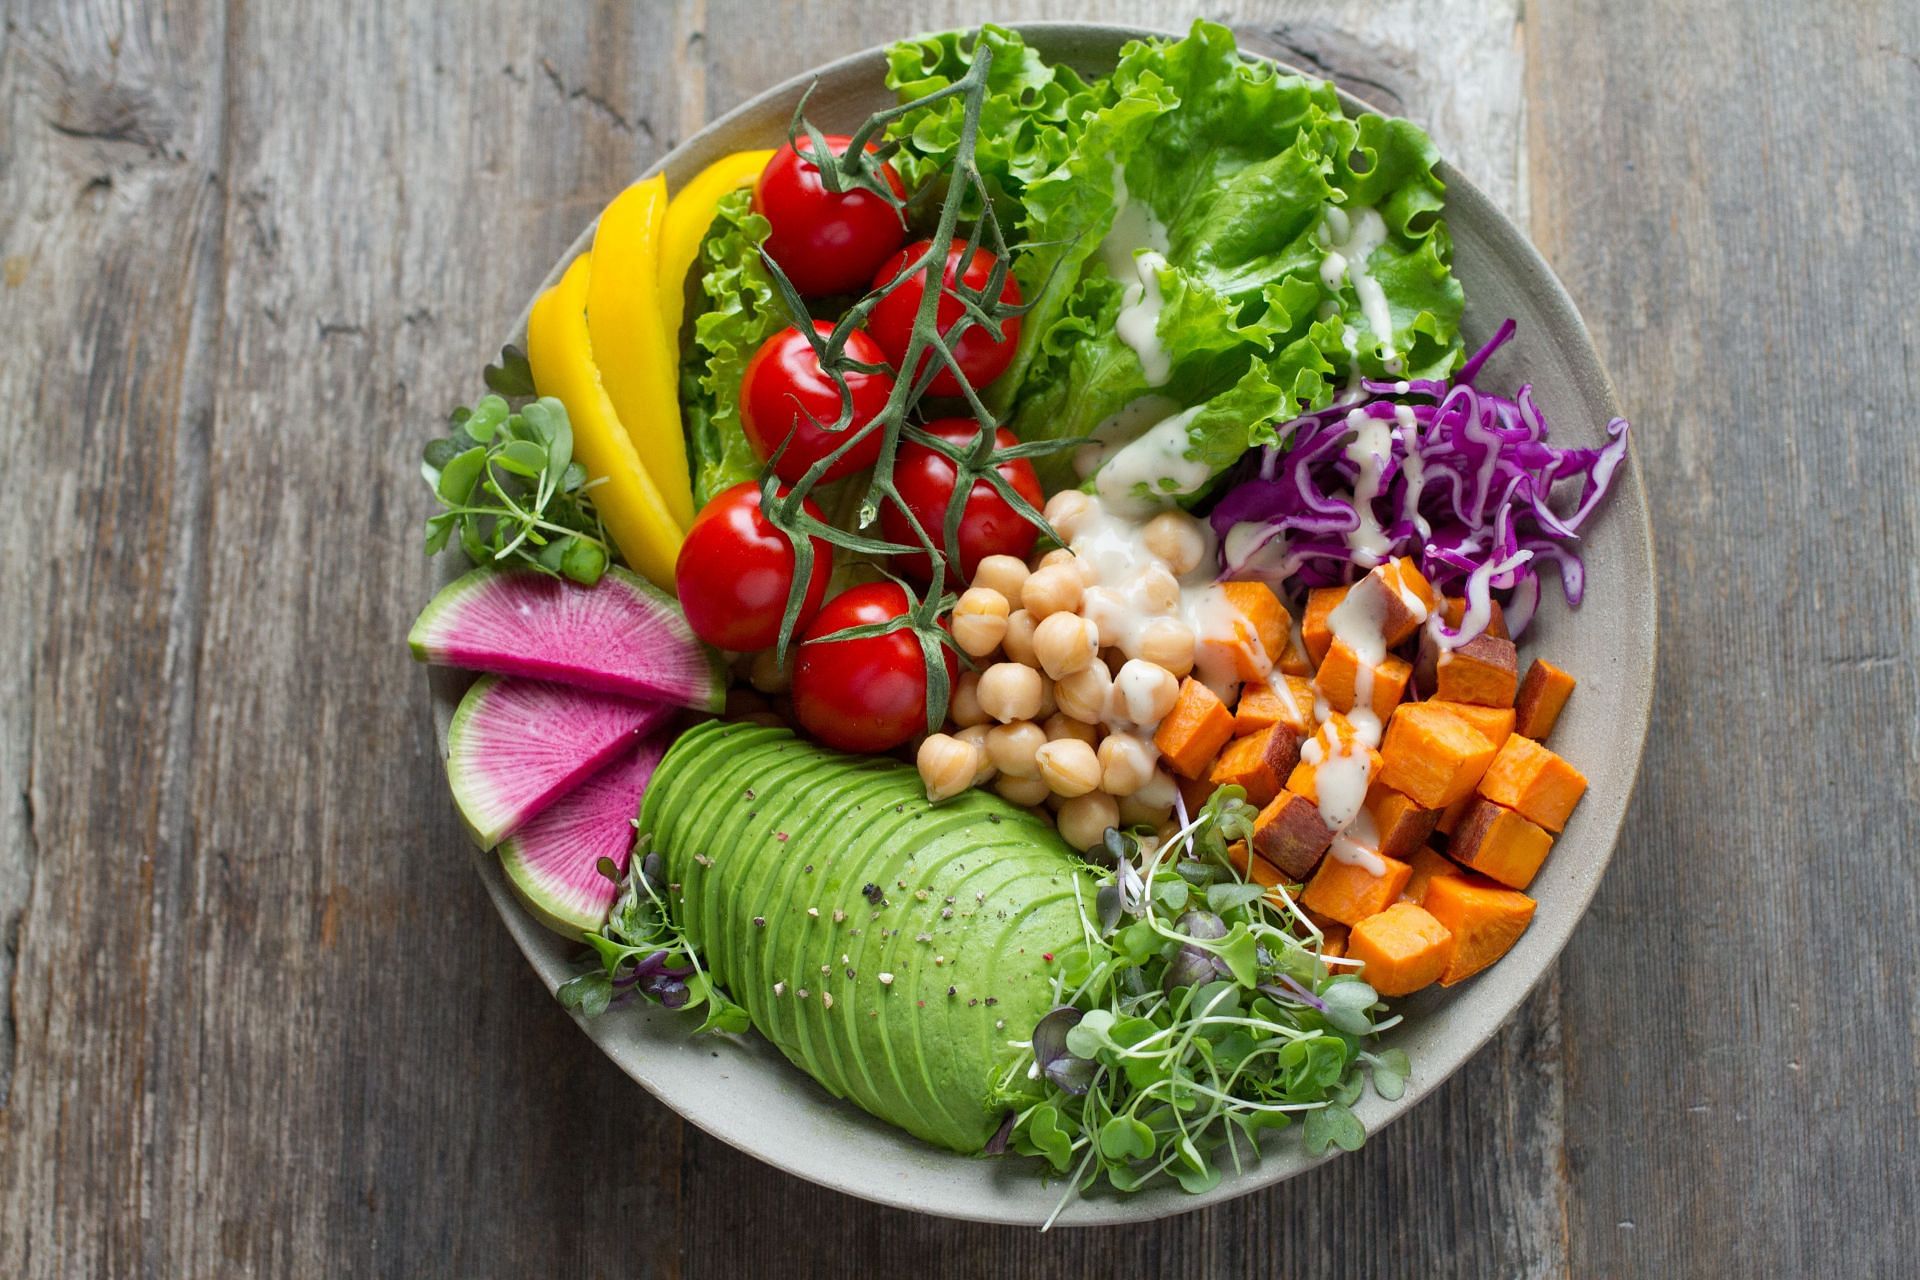 Most Popular Fad Diets: Which One Is Right For You? (Image via Unsplash / Anna Pelzer)